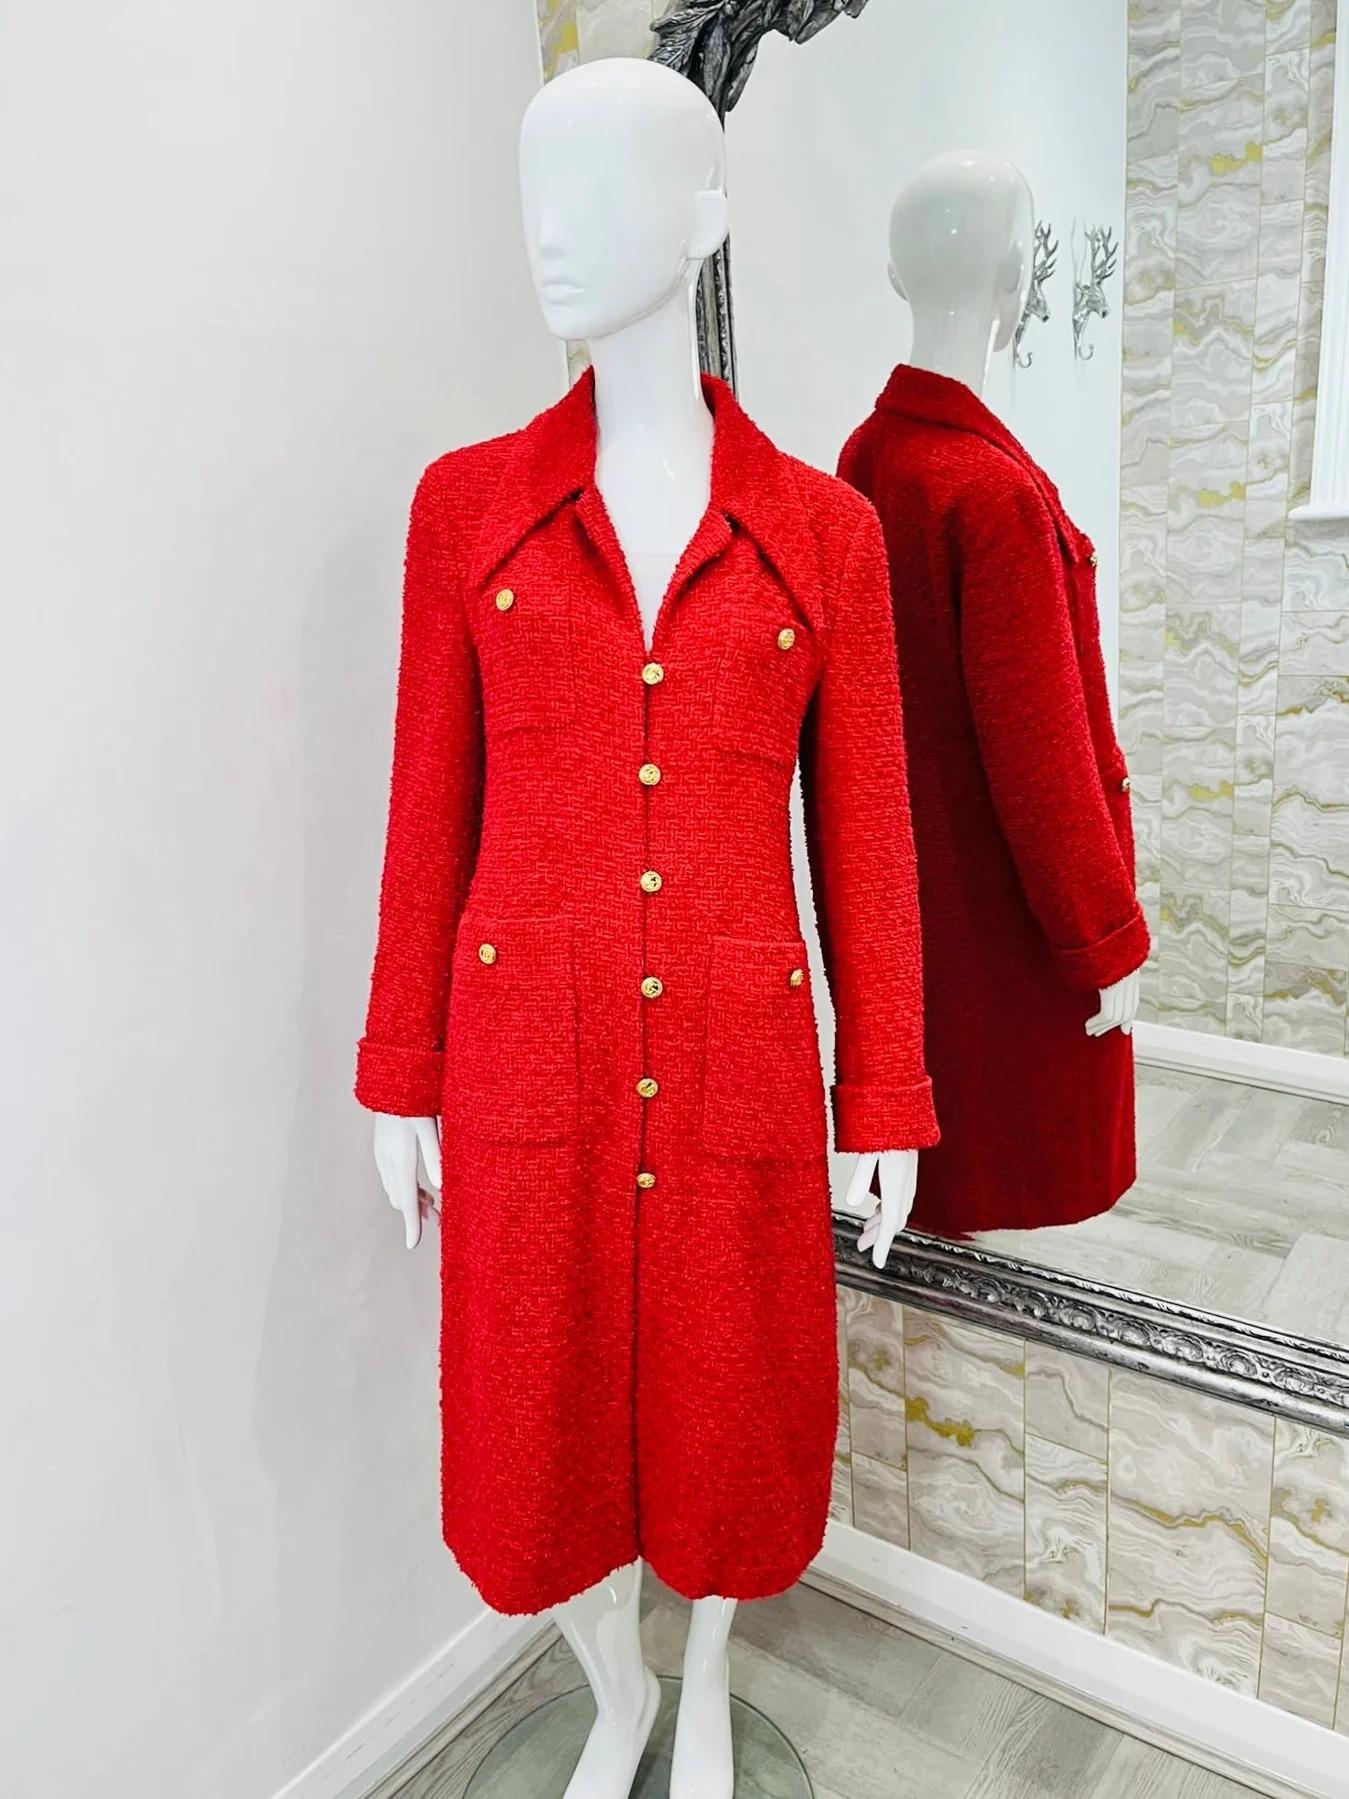 Gucci Boucle Coat 

Bright red with gold logo buttons and four patch pockets. Fully lined.

Additional information:
Size – 44FR
Composition – 52% Polyamide, 38% Cotton, 10% Acrylic, Lining 73% Cupro, 27% Silk
Condition – Very Good